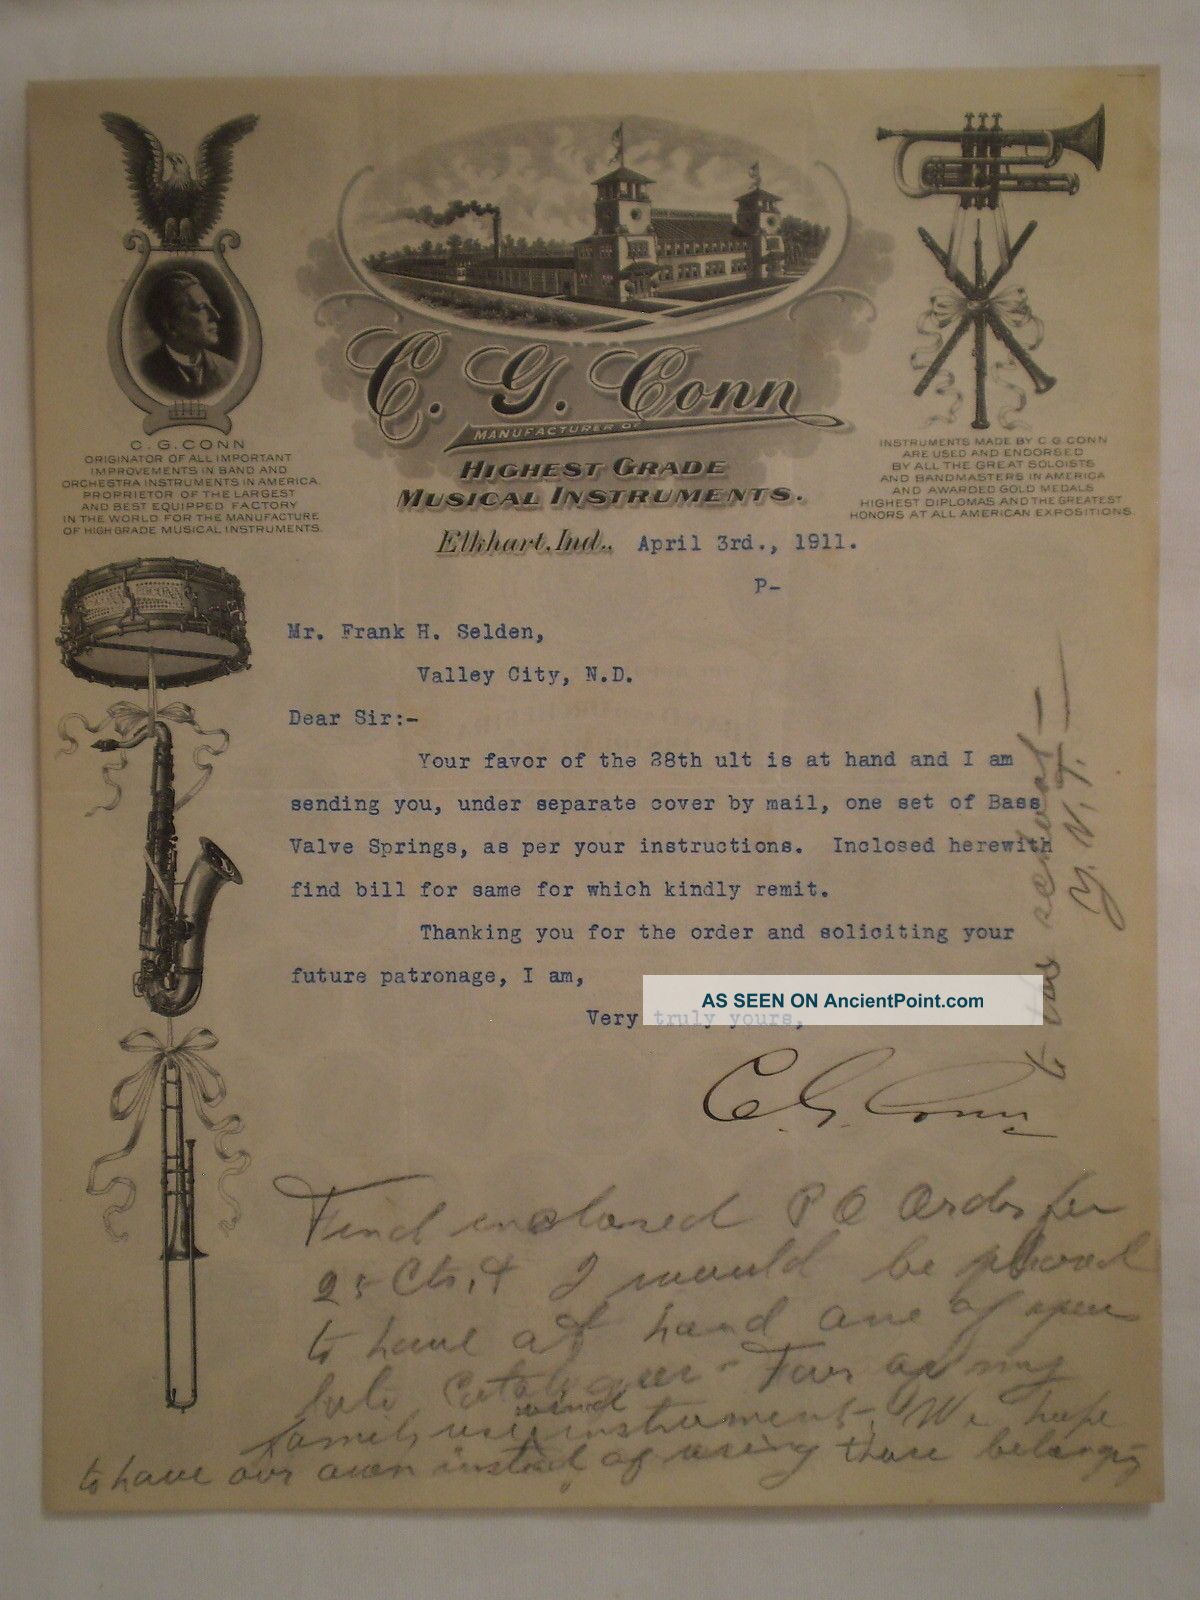 Antique 1911 Handsigned C G Conn Signature Letterhead Musical Instrument Graphic Other photo